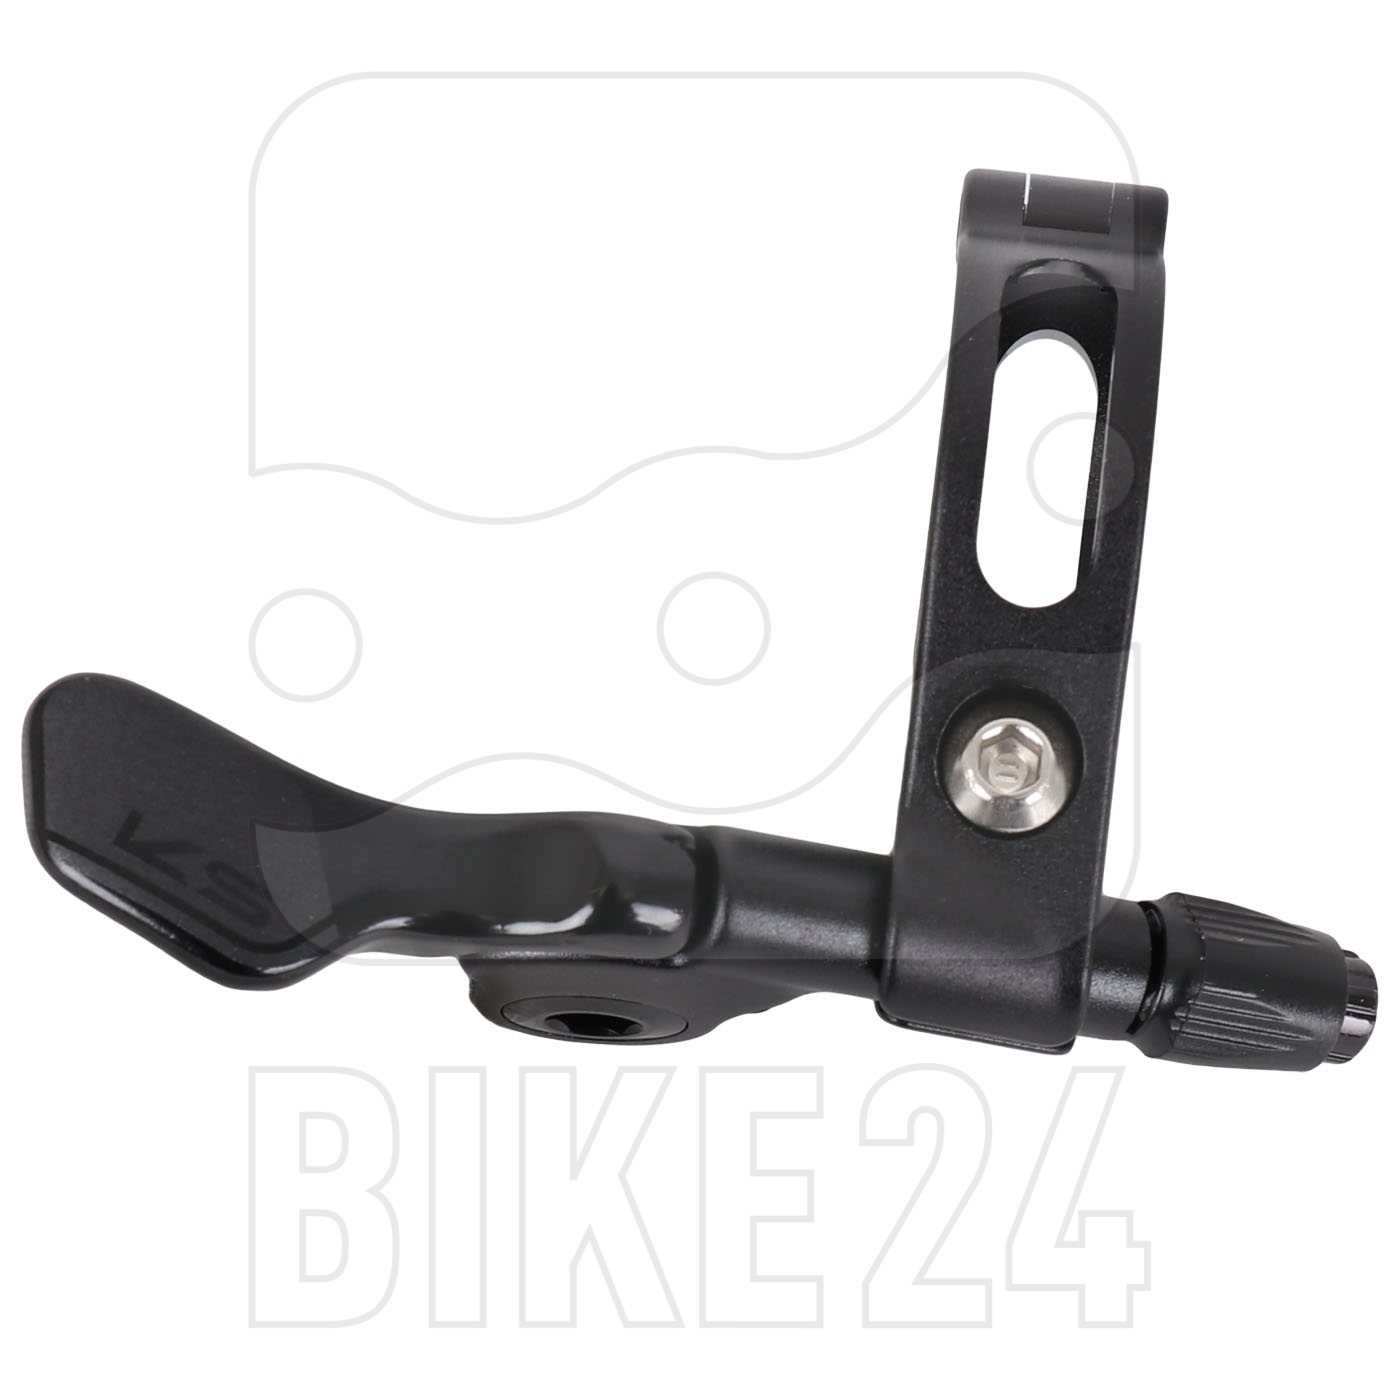 Productfoto van KS Southpaw Alloy Remote - Universal - for 31.8mm bar clamp